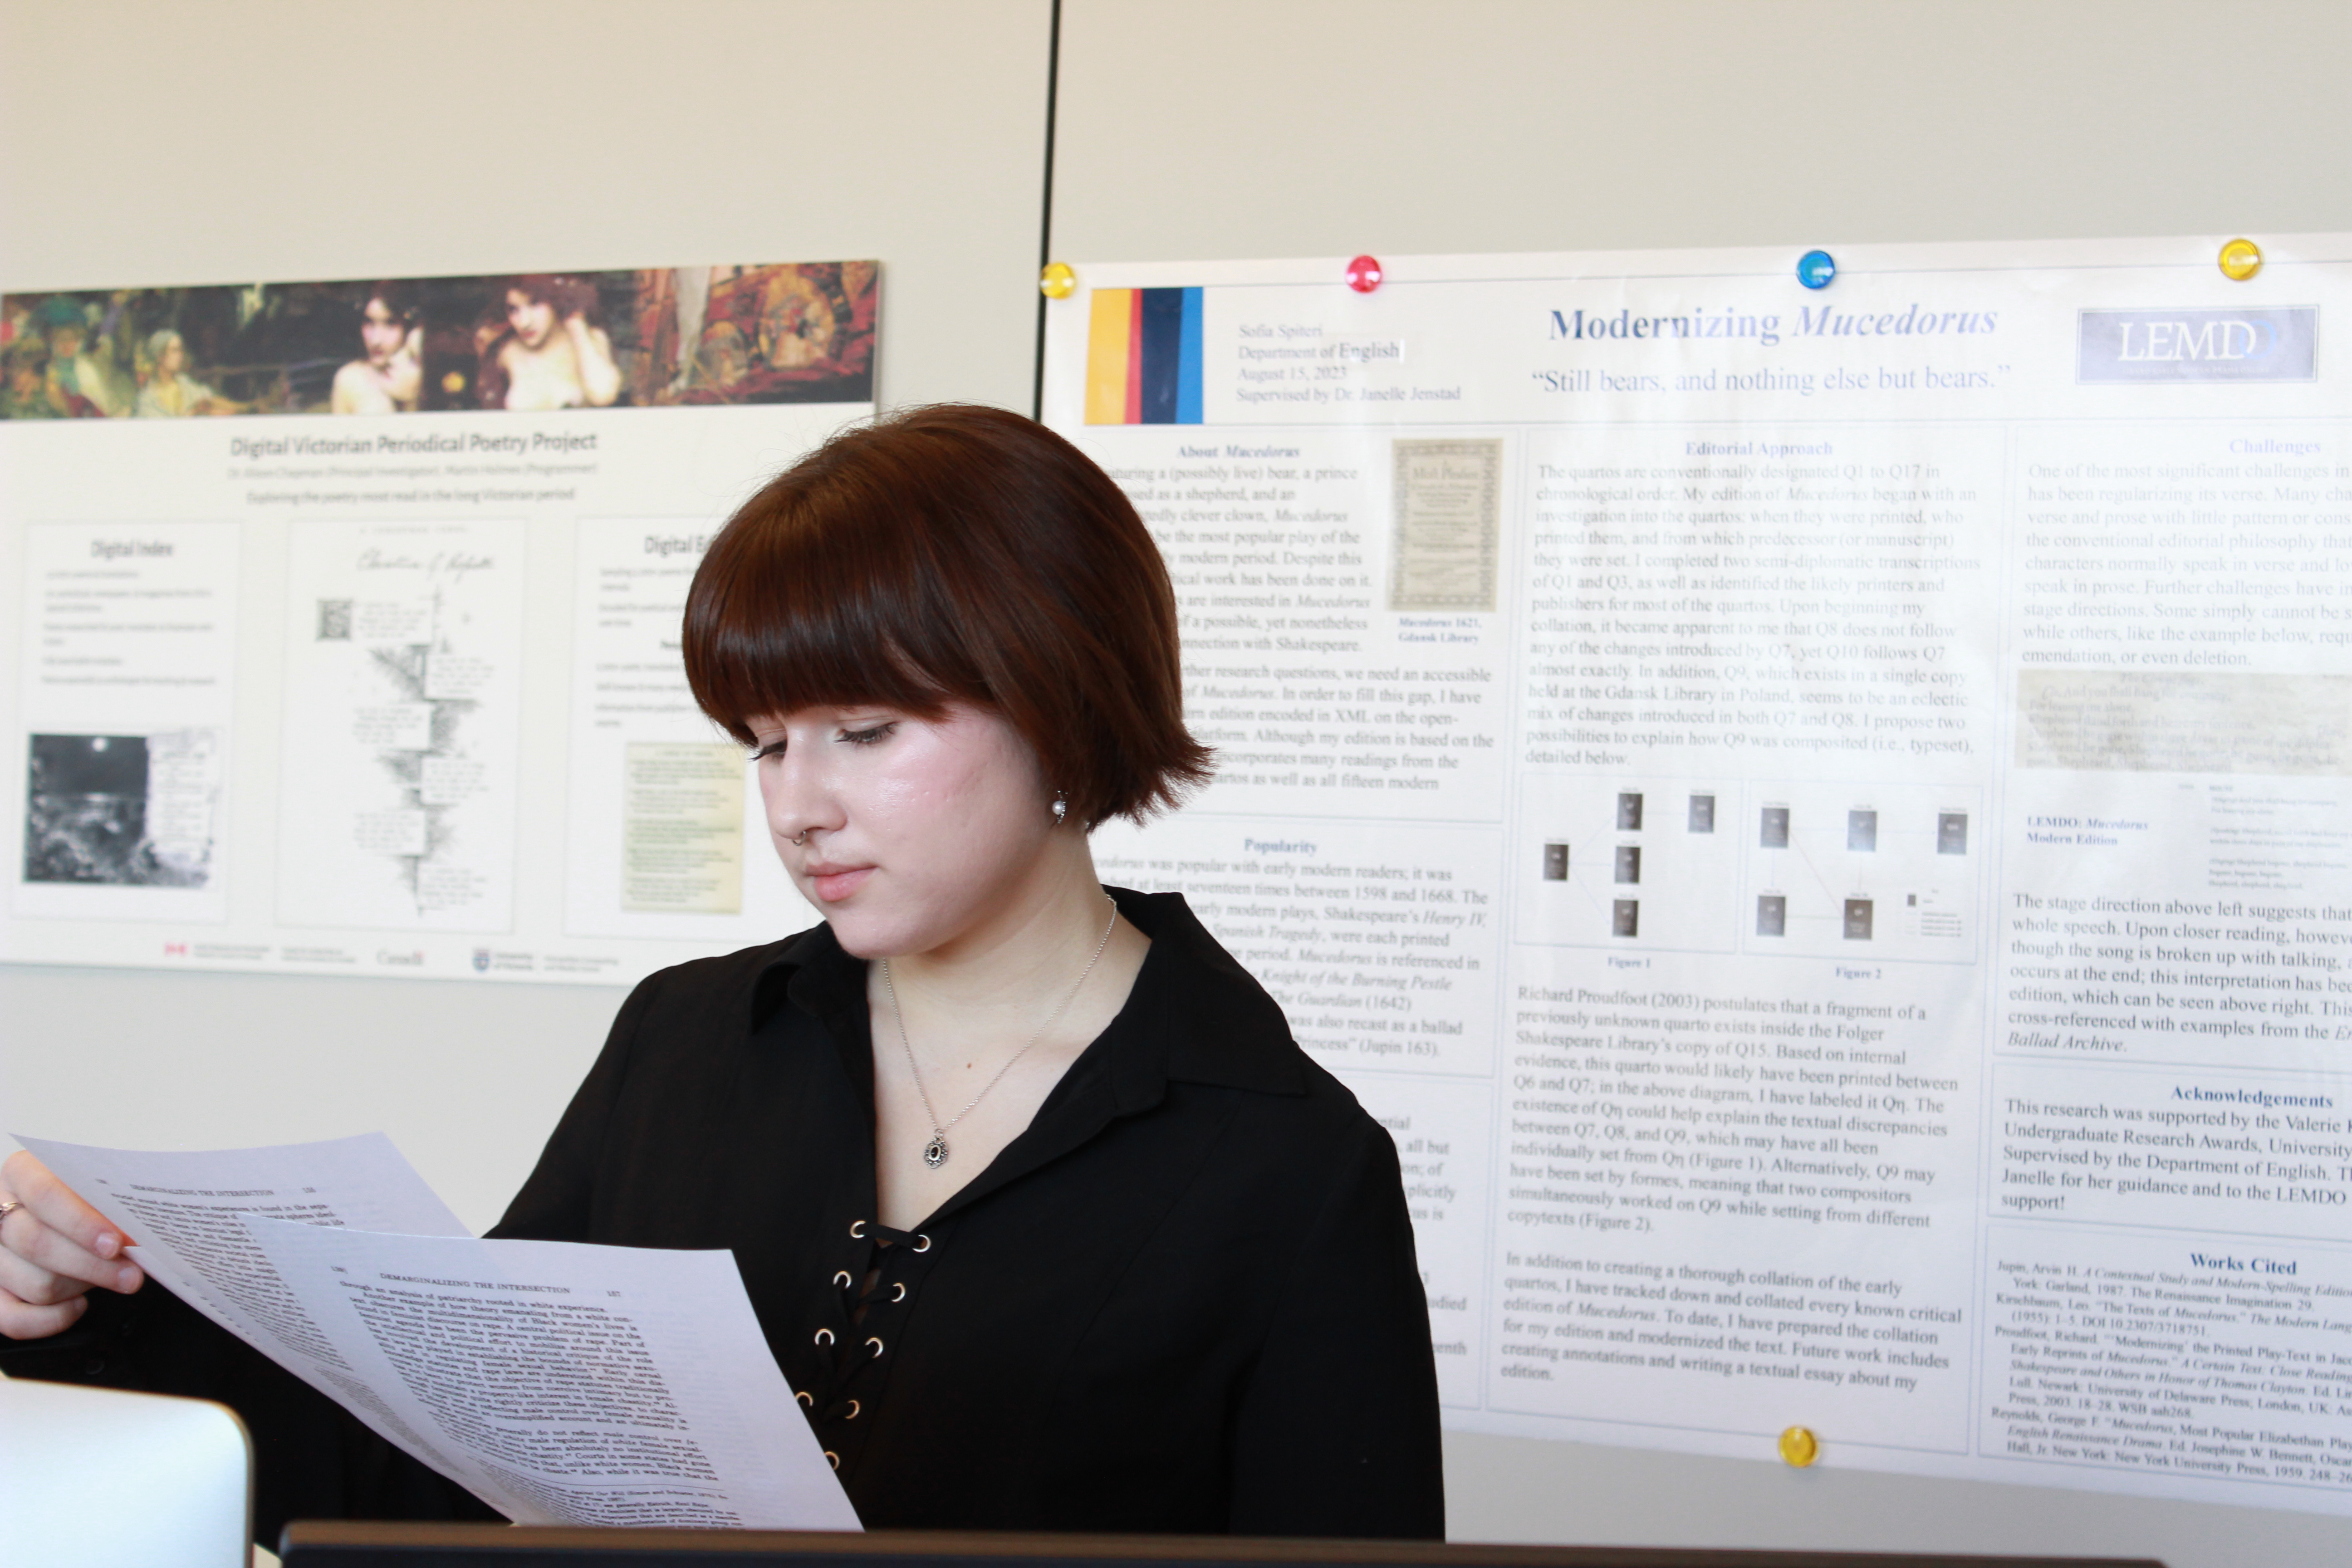 Sofia is reading while standing in front of her research poster.